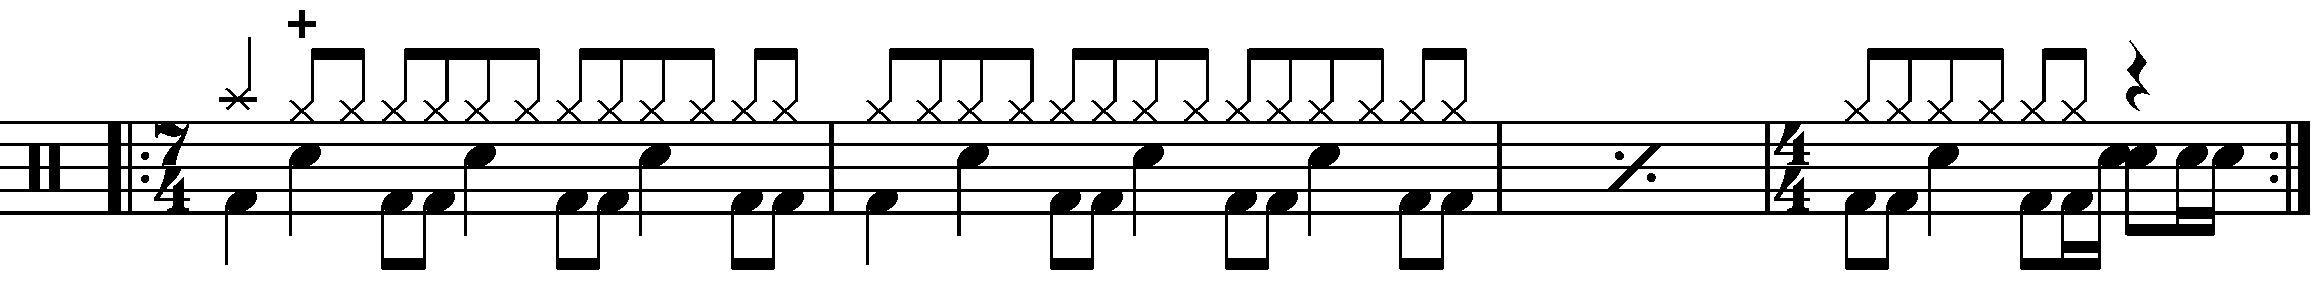 A four bar phrase using 4/4 and 7/4.